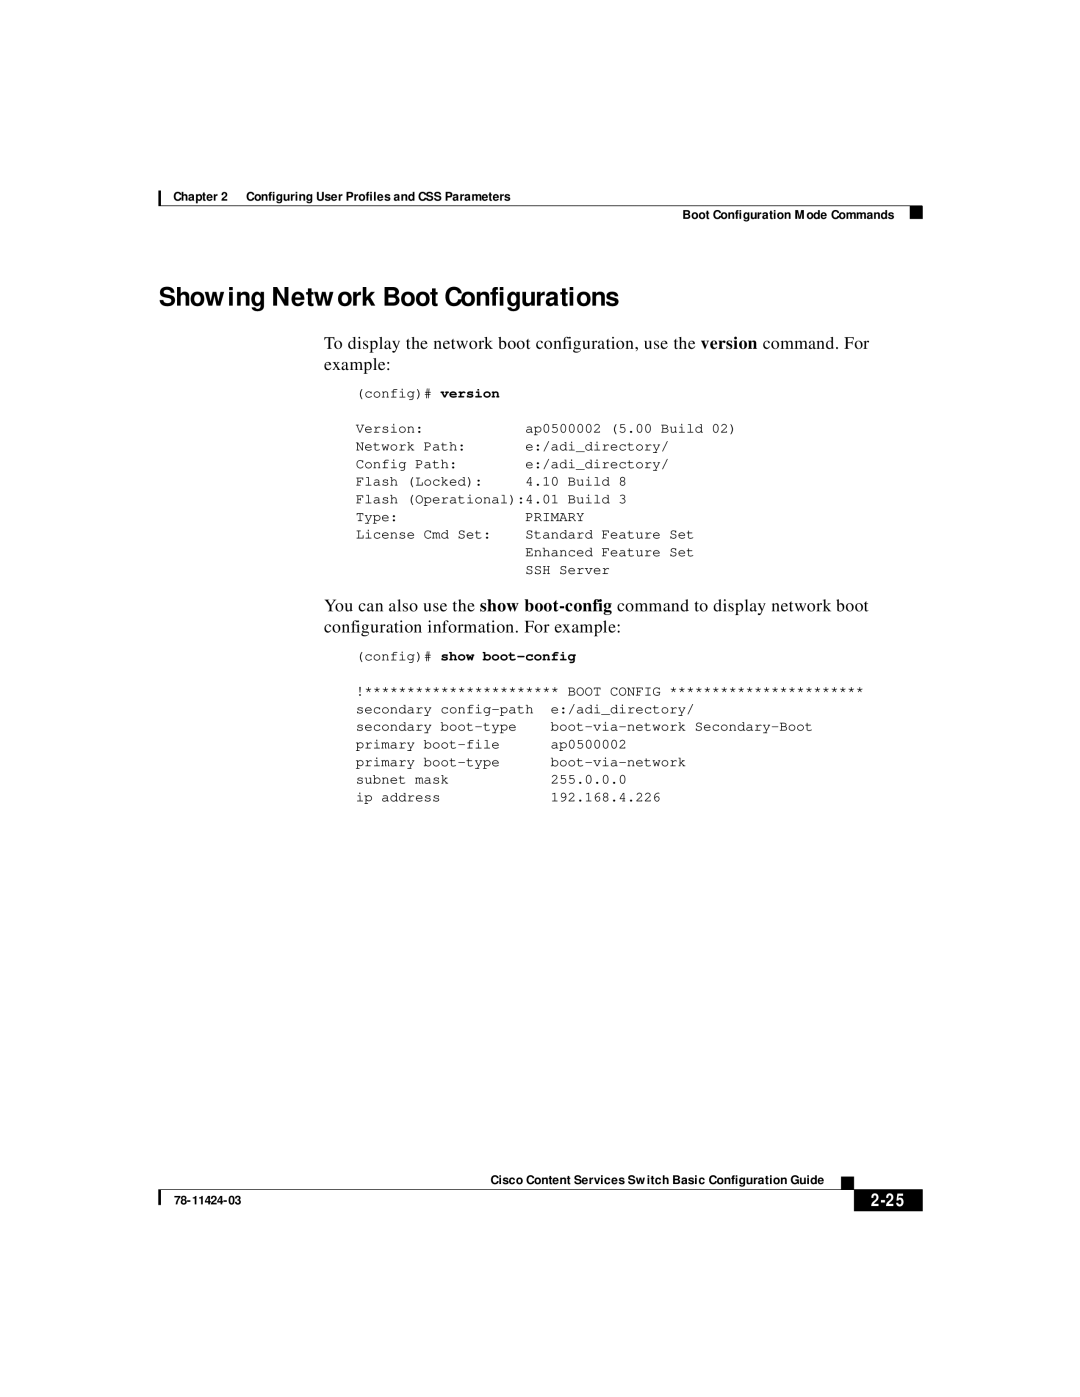 Cisco Systems 78-11424-03 manual Showing Network Boot Configurations, 2-25, config# show boot-config 